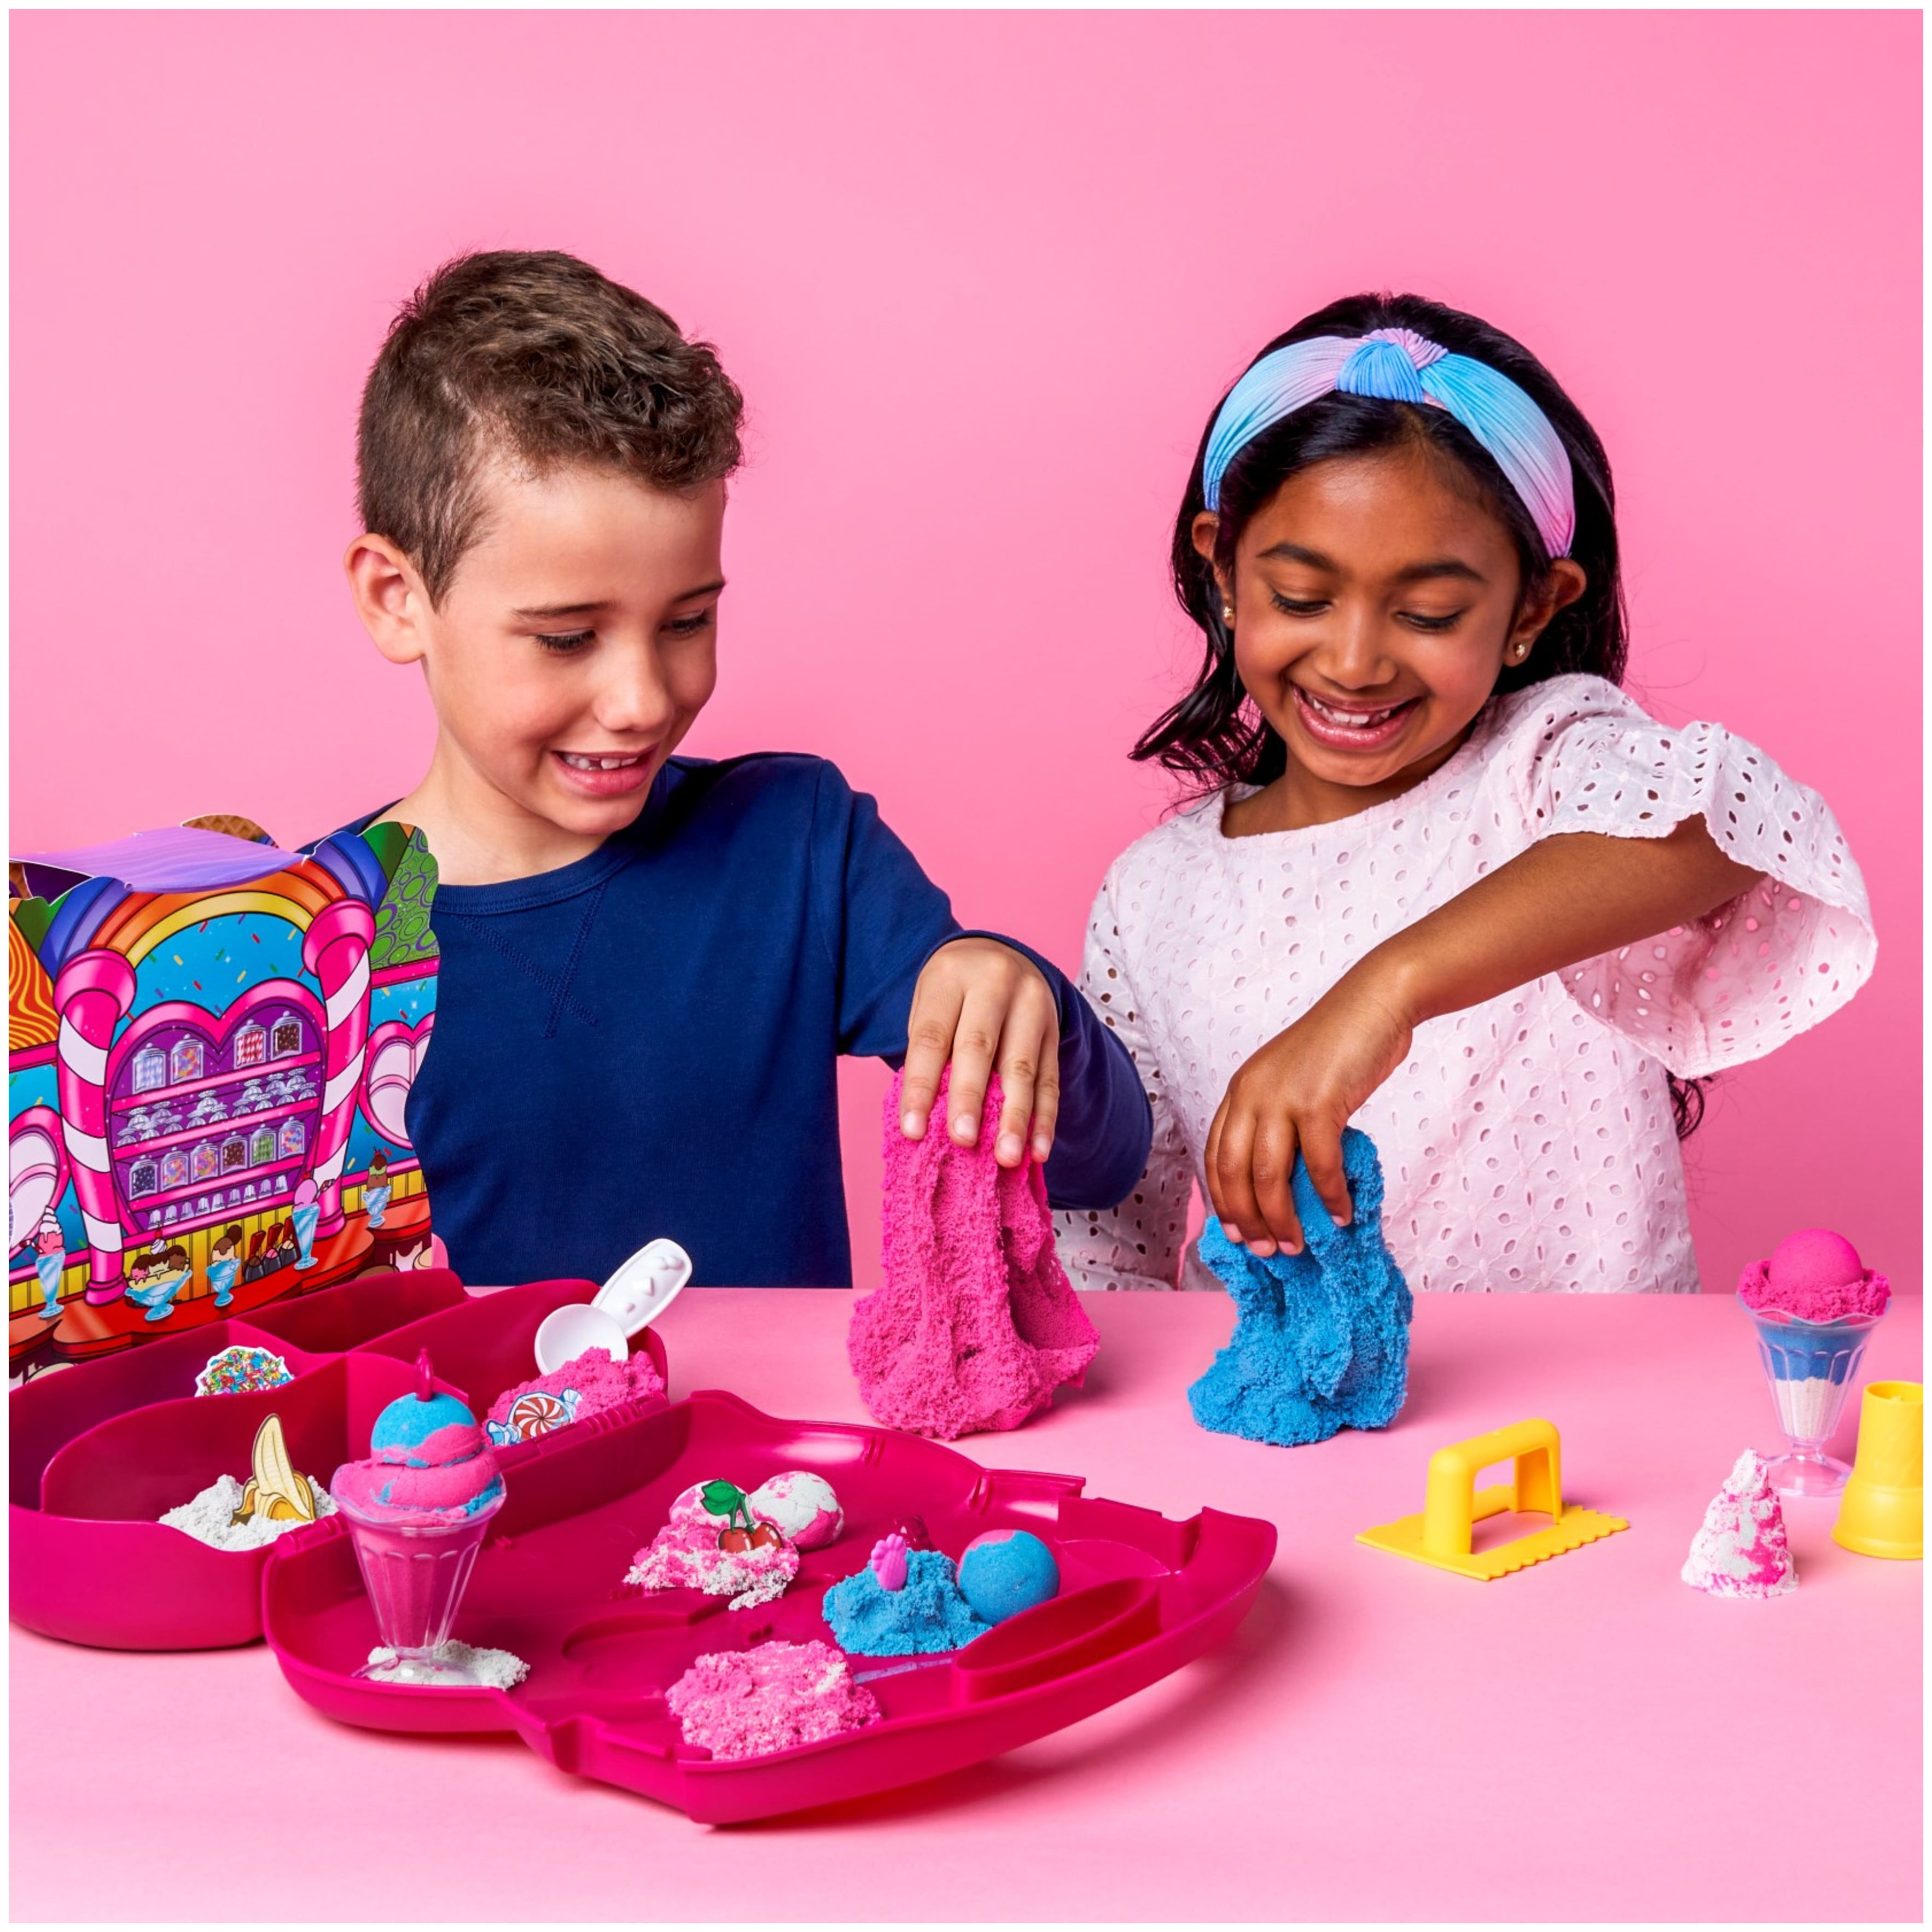  Kinetic Sand Scents, Ice Cream Treats Playset with 3